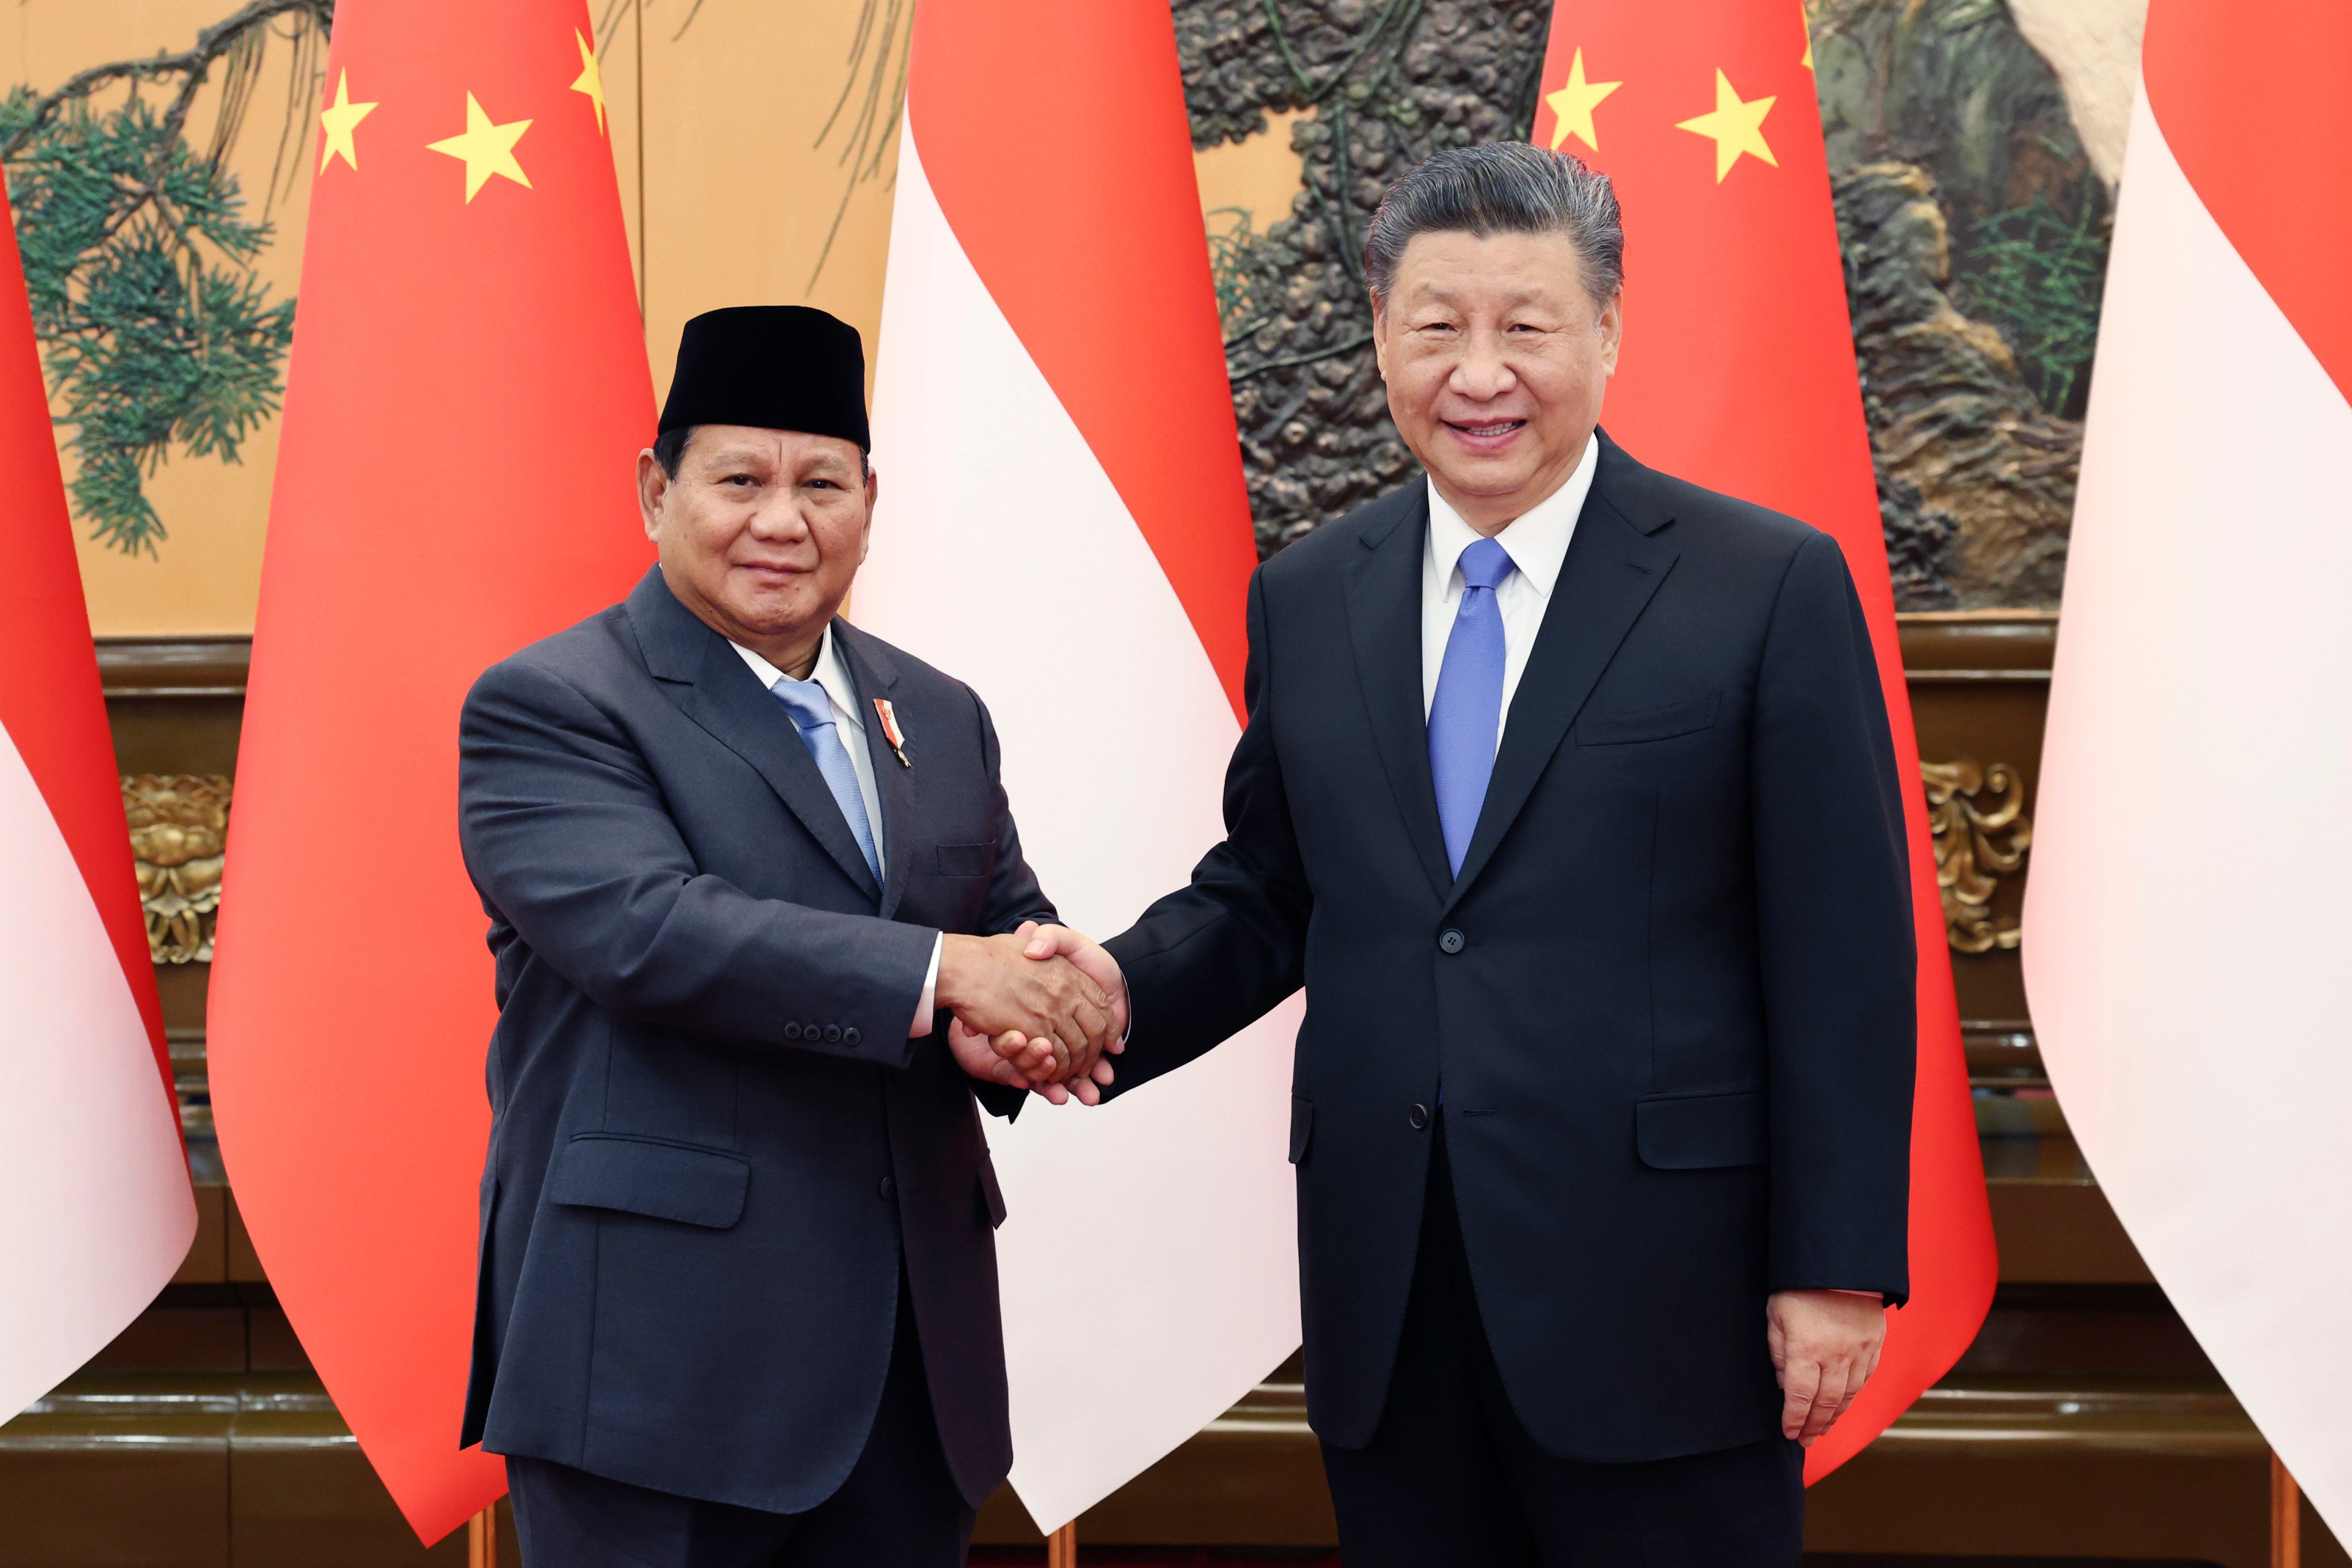 Indonesian president-elect Prabowo Subianto with Chinese President Xi Jinping at the Great Hall of the People in Beijing on April 1. Photo: Xinhua via AP